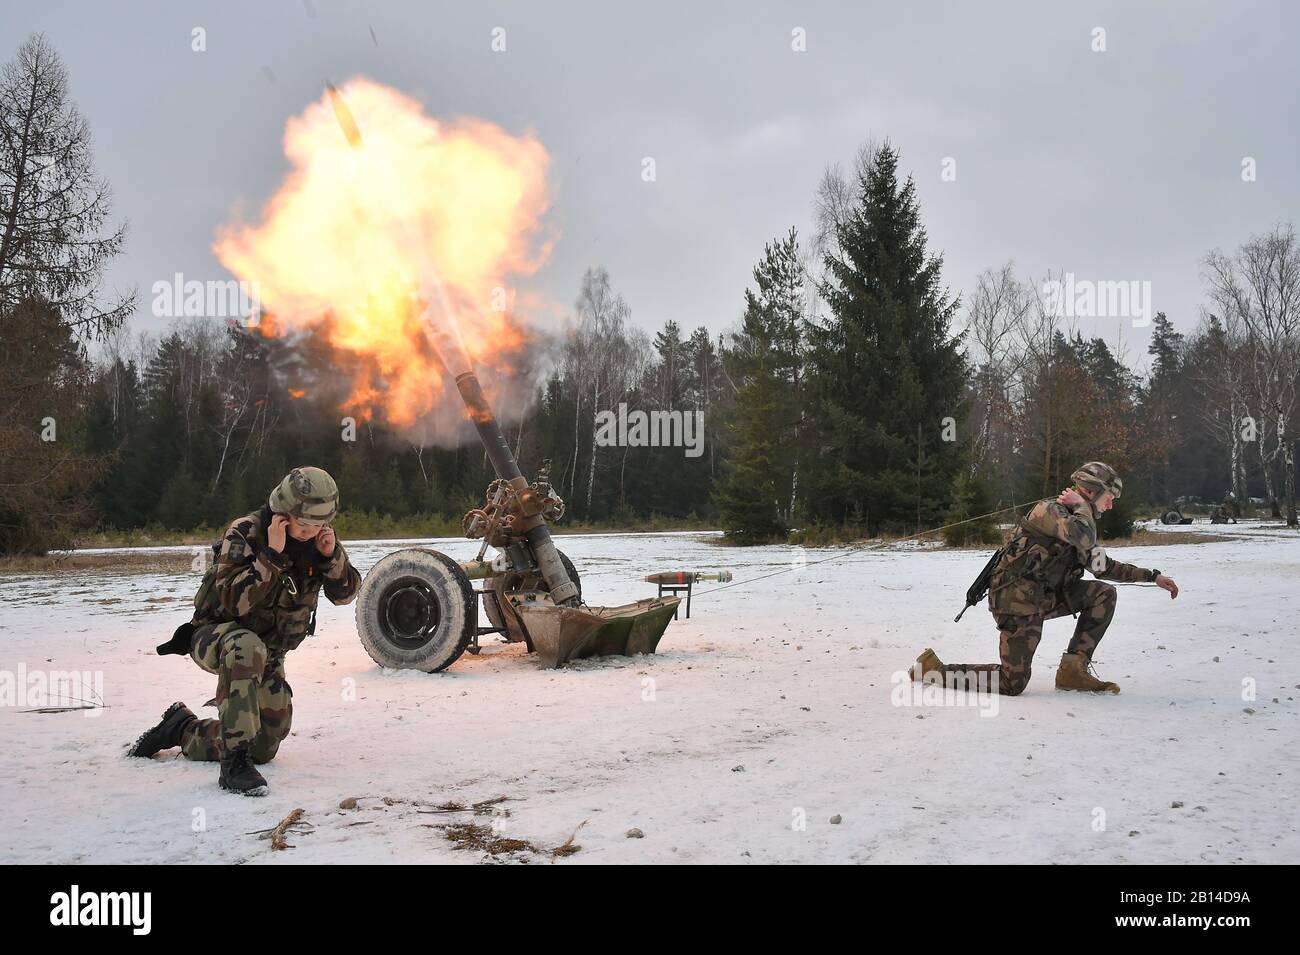 French soldiers conduct fire missions with a 120mm mortar as part of Exercise Dynamic Front 18 at the U.S. Army’s Grafenwoehr Training Area, Germany, March 5, 2018. The Exercise includes approximately 3,700 participants from 26 nations. Dynamic Front is an annual U.S. Army Europe (USAREUR) exercise focused on the interoperability of U.S. Army, joint service and allied nation artillery and fire support in a multinational environment, from theater-level headquarters identifying targets to gun crews pulling lanyards in the field. (U.S. Army photo by Gertrud Zach) Stock Photo